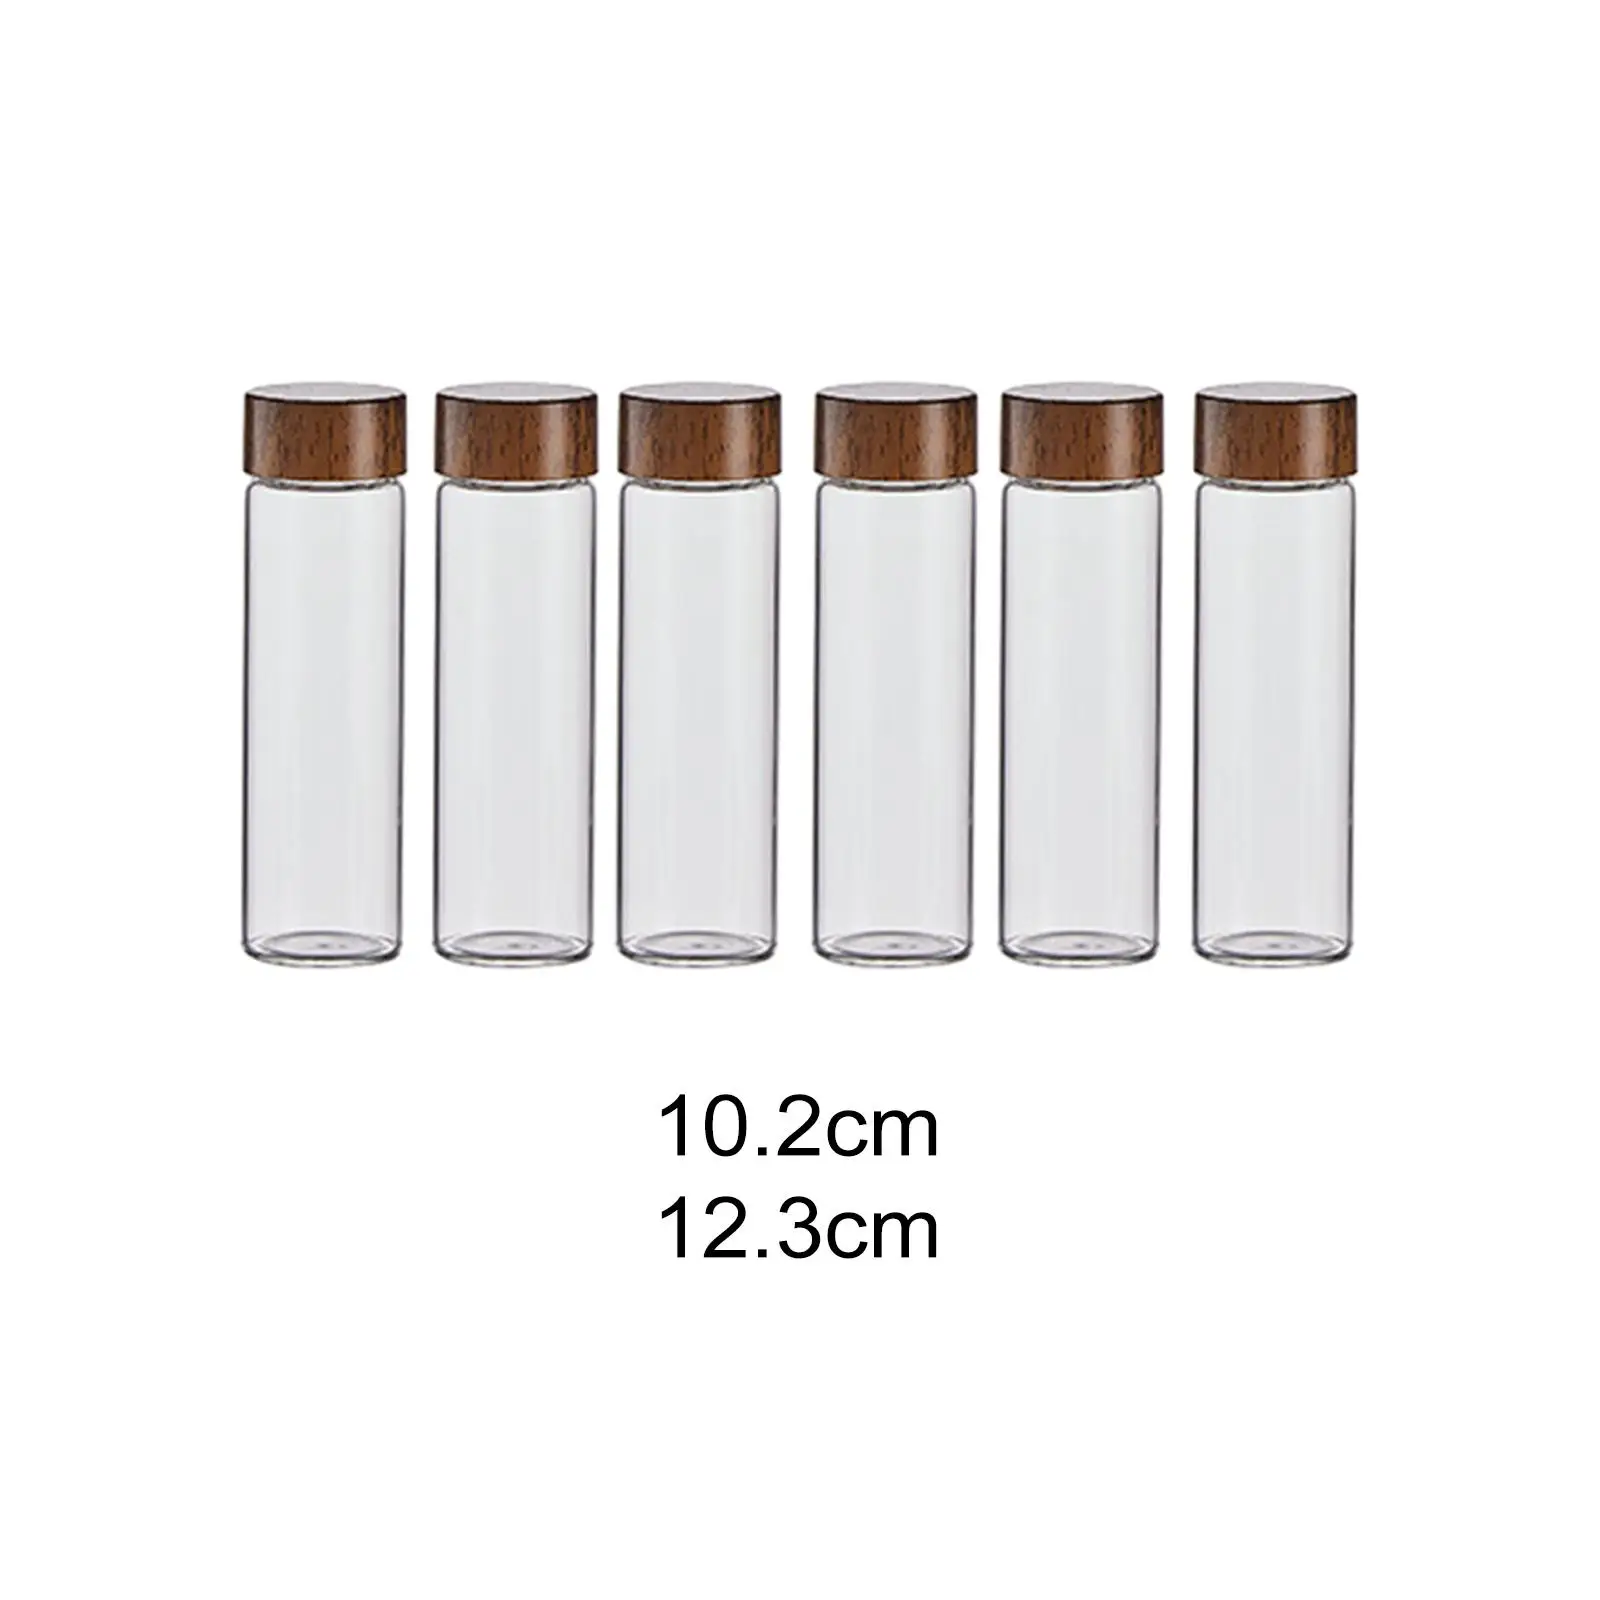 6x Coffee Party Decoration Tea Sugar Canister Coffee Bean Dispenser for Countertop Bar Coffee Shop Cafe Kitchen